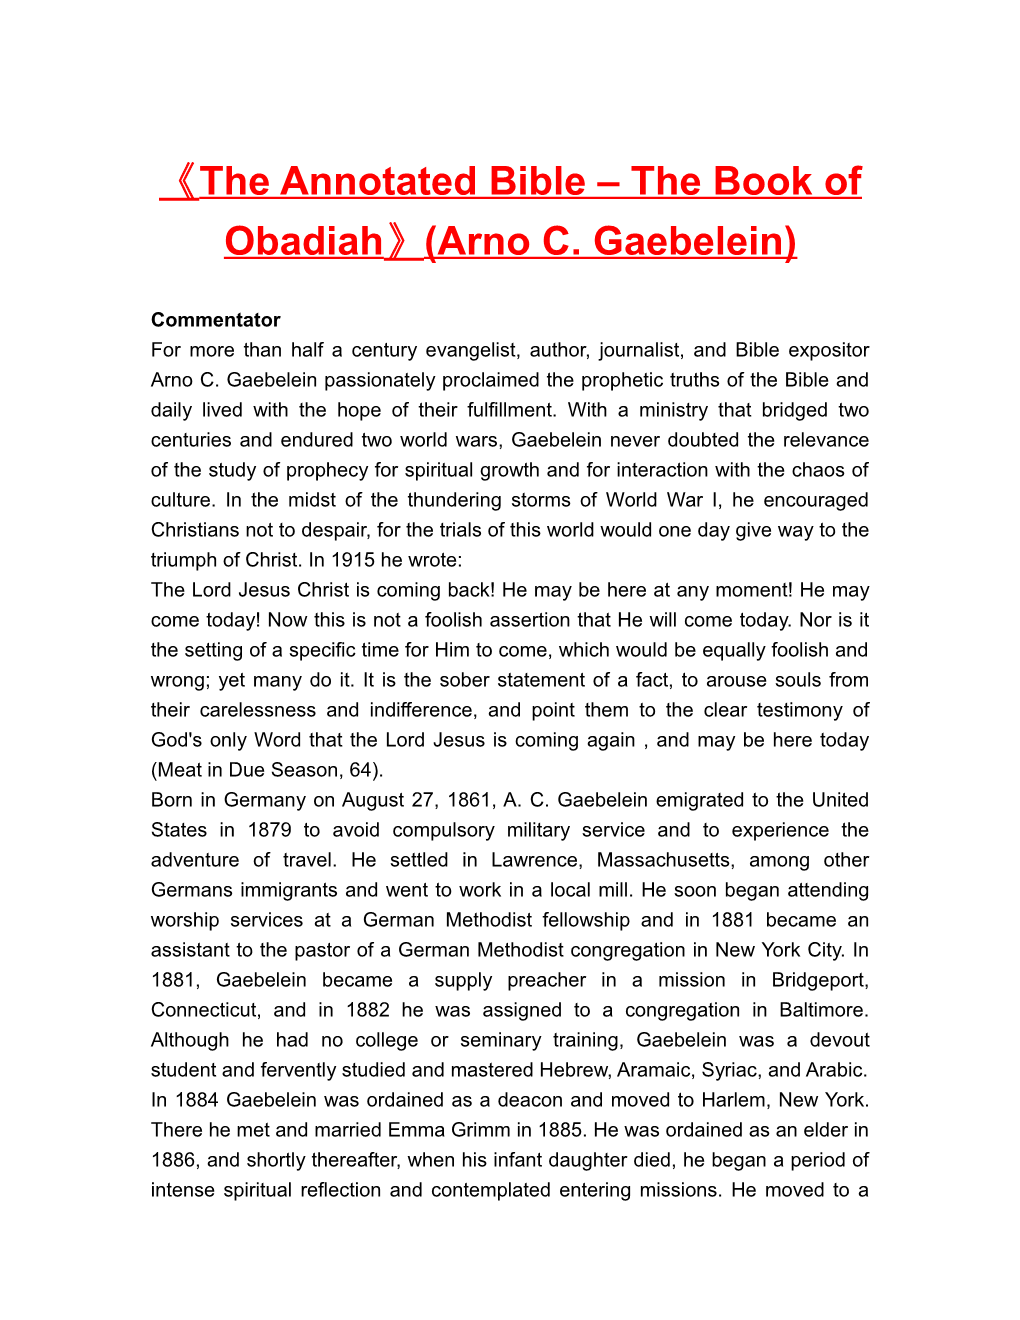 The Annotated Bible the Book of Obadiah (Arno C. Gaebelein)